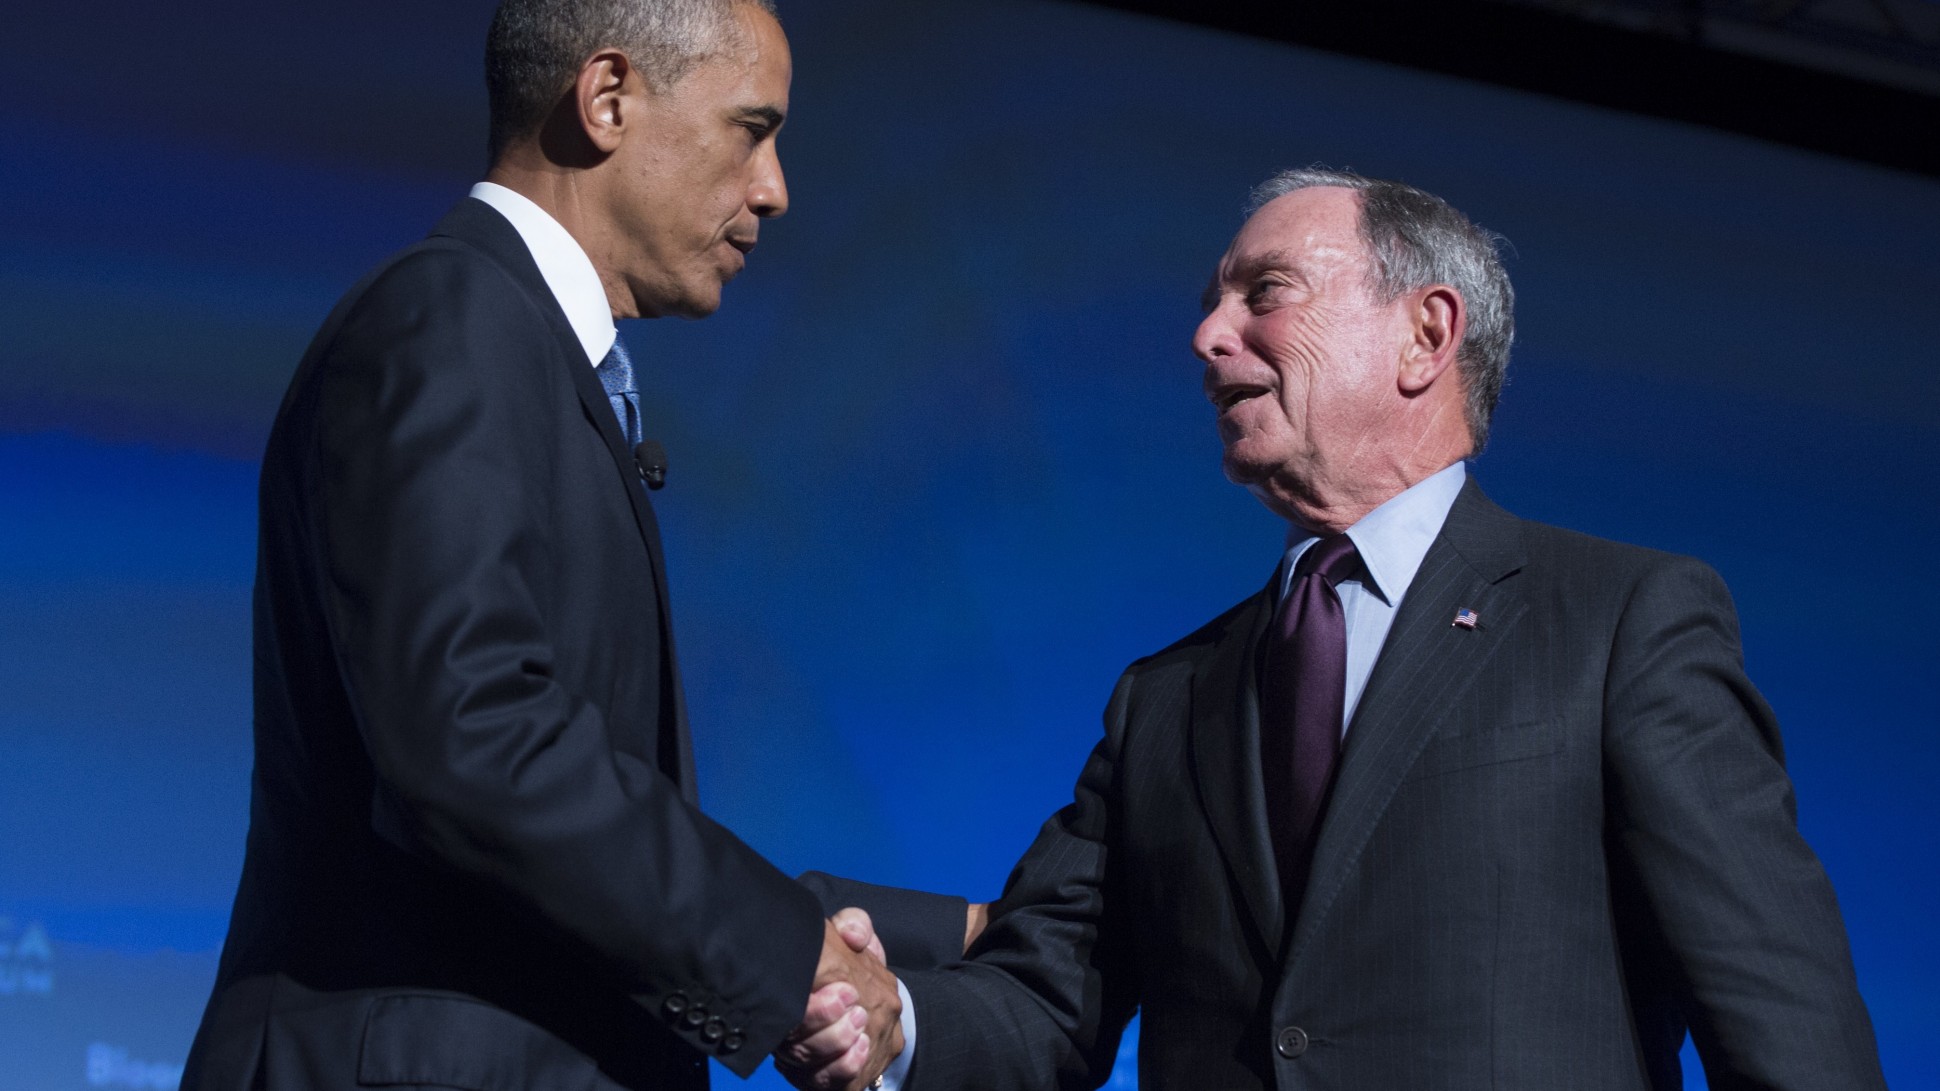 Image: Michael Bloomberg vows to shut down all U.S. coal plants, plunging America’s power grid into darkness, unleashing “third world” riots across America